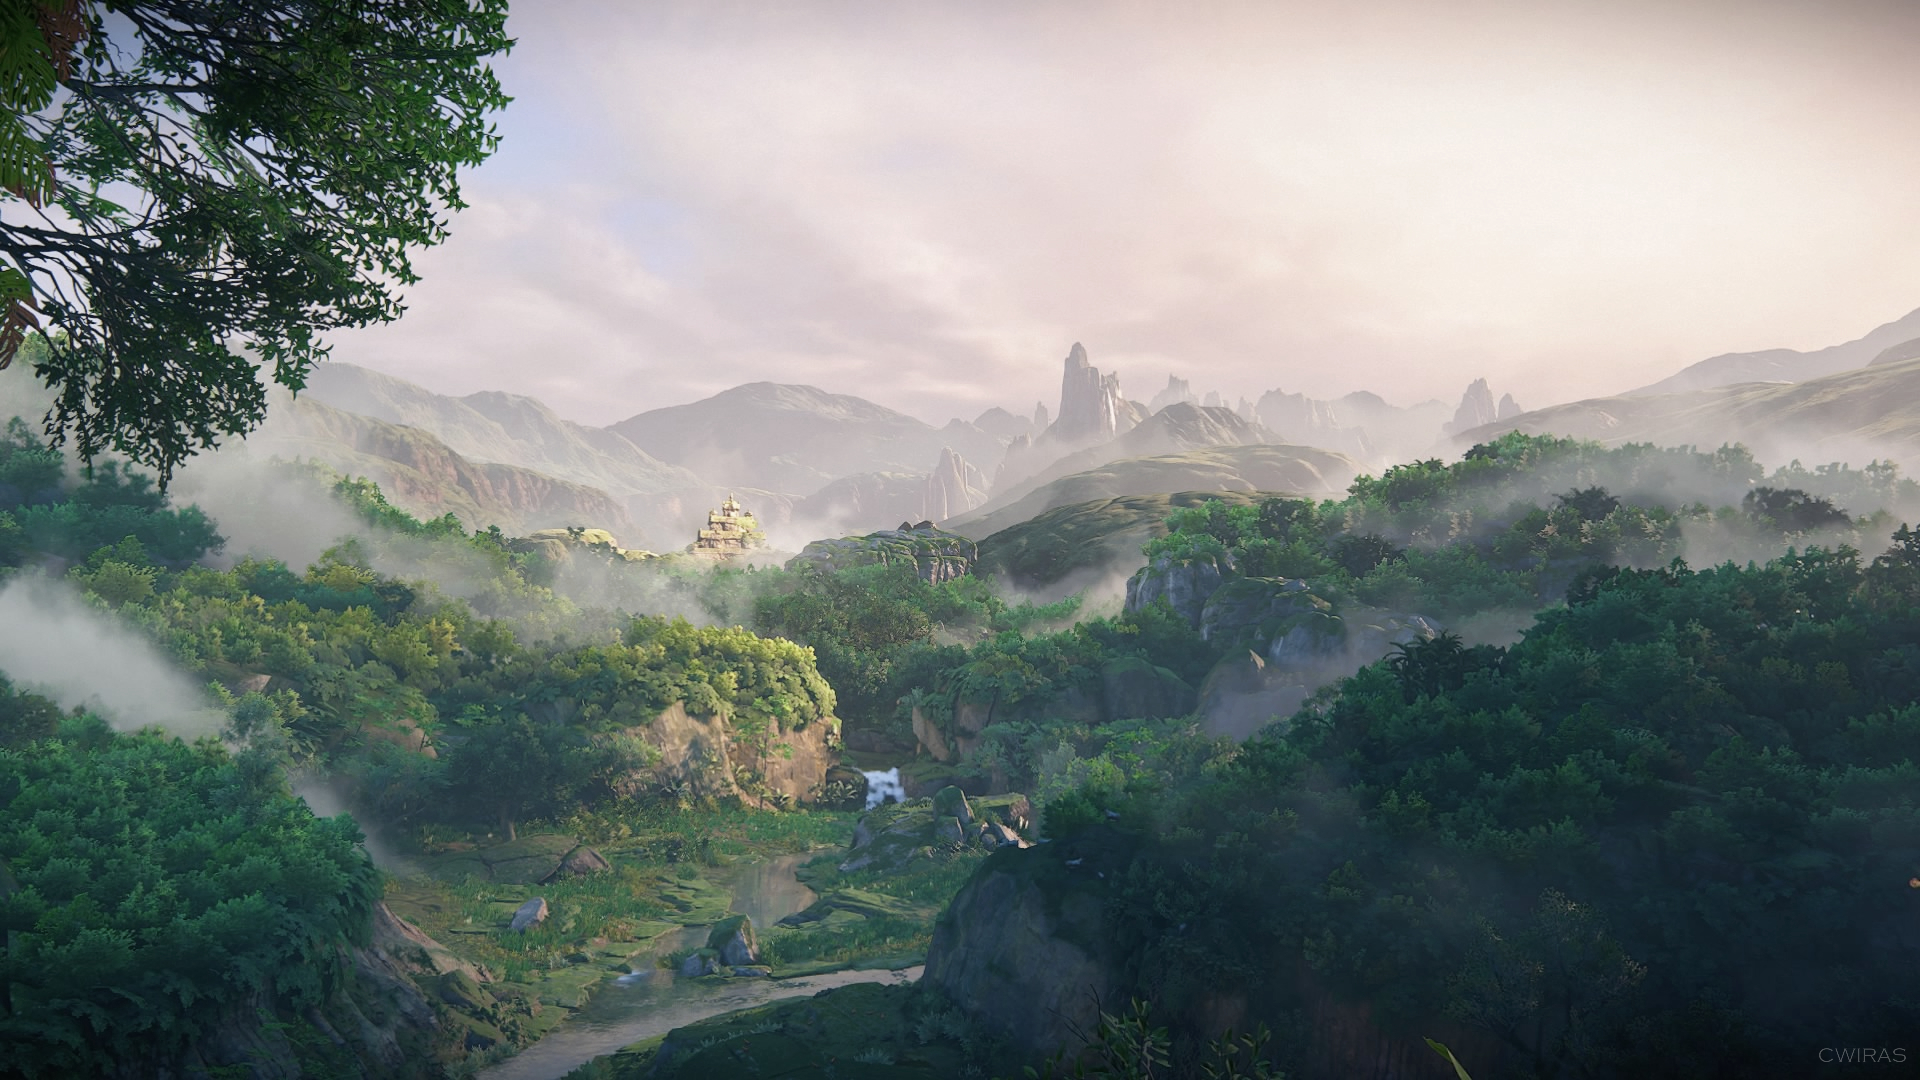 General 1920x1080 video games video game art screen shot green mountains PlayStation PlayStation 4 Sony Naughty Dog Uncharted Uncharted : The Lost Legacy forest gorge trees landscape